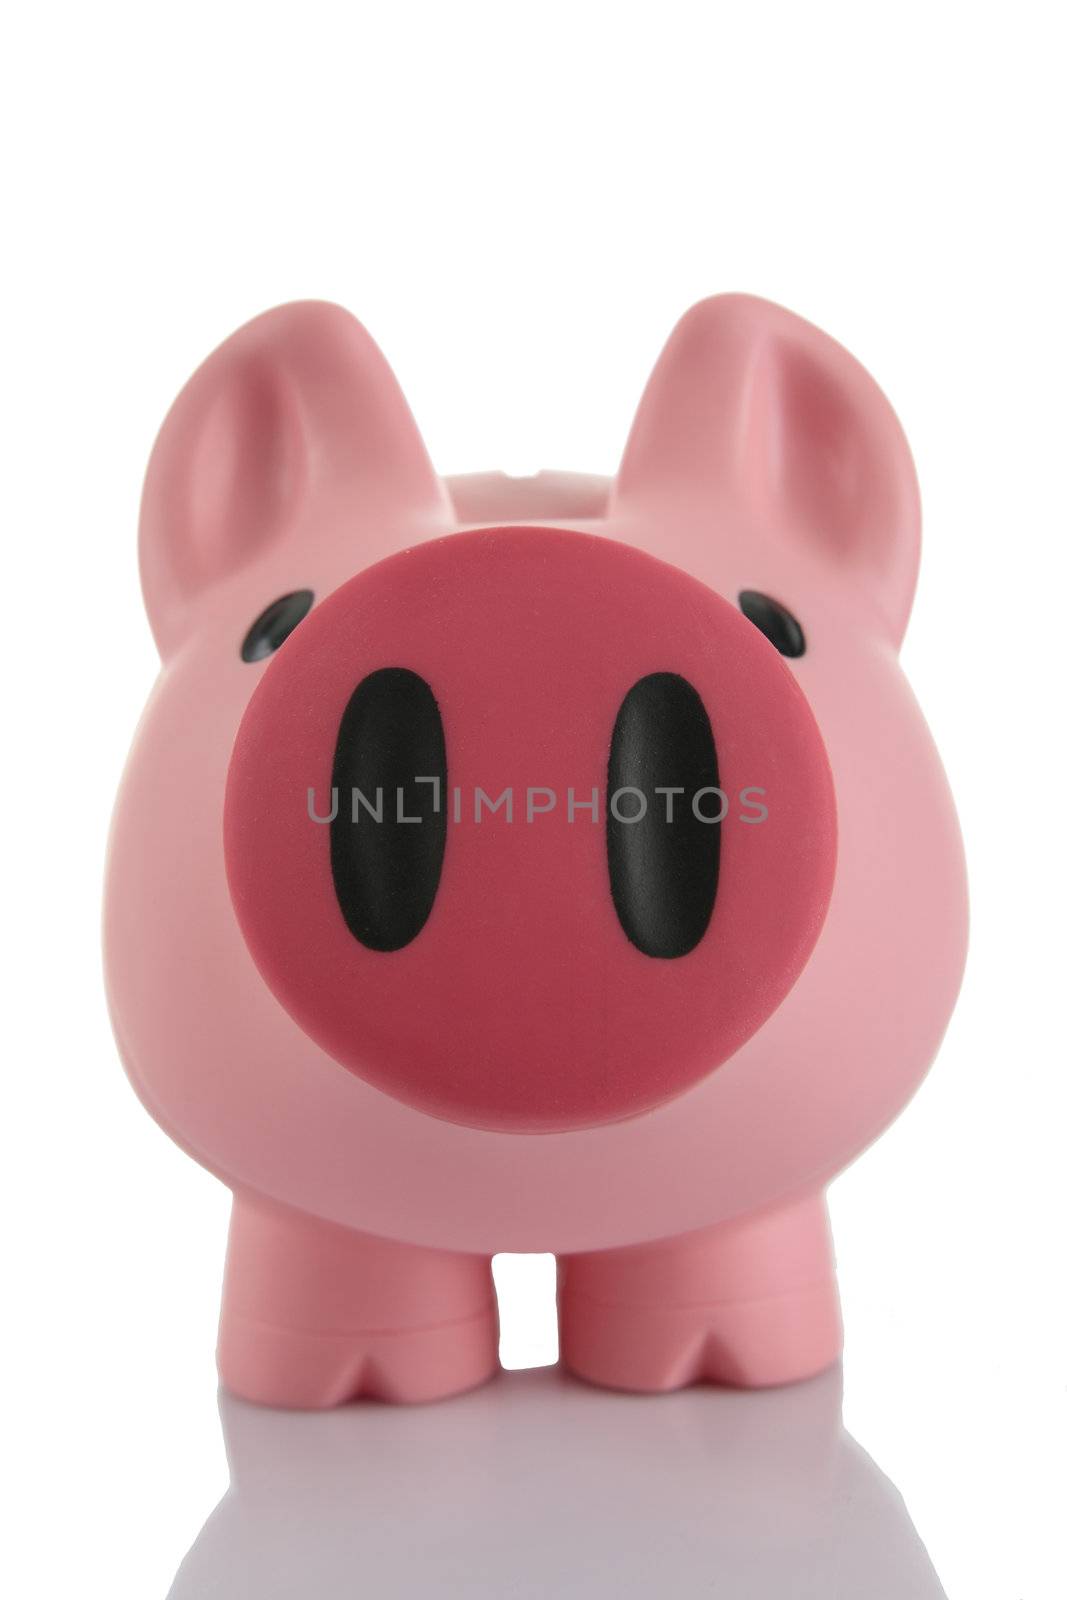 Pink Piggy Bank (moneybox) isolated on white